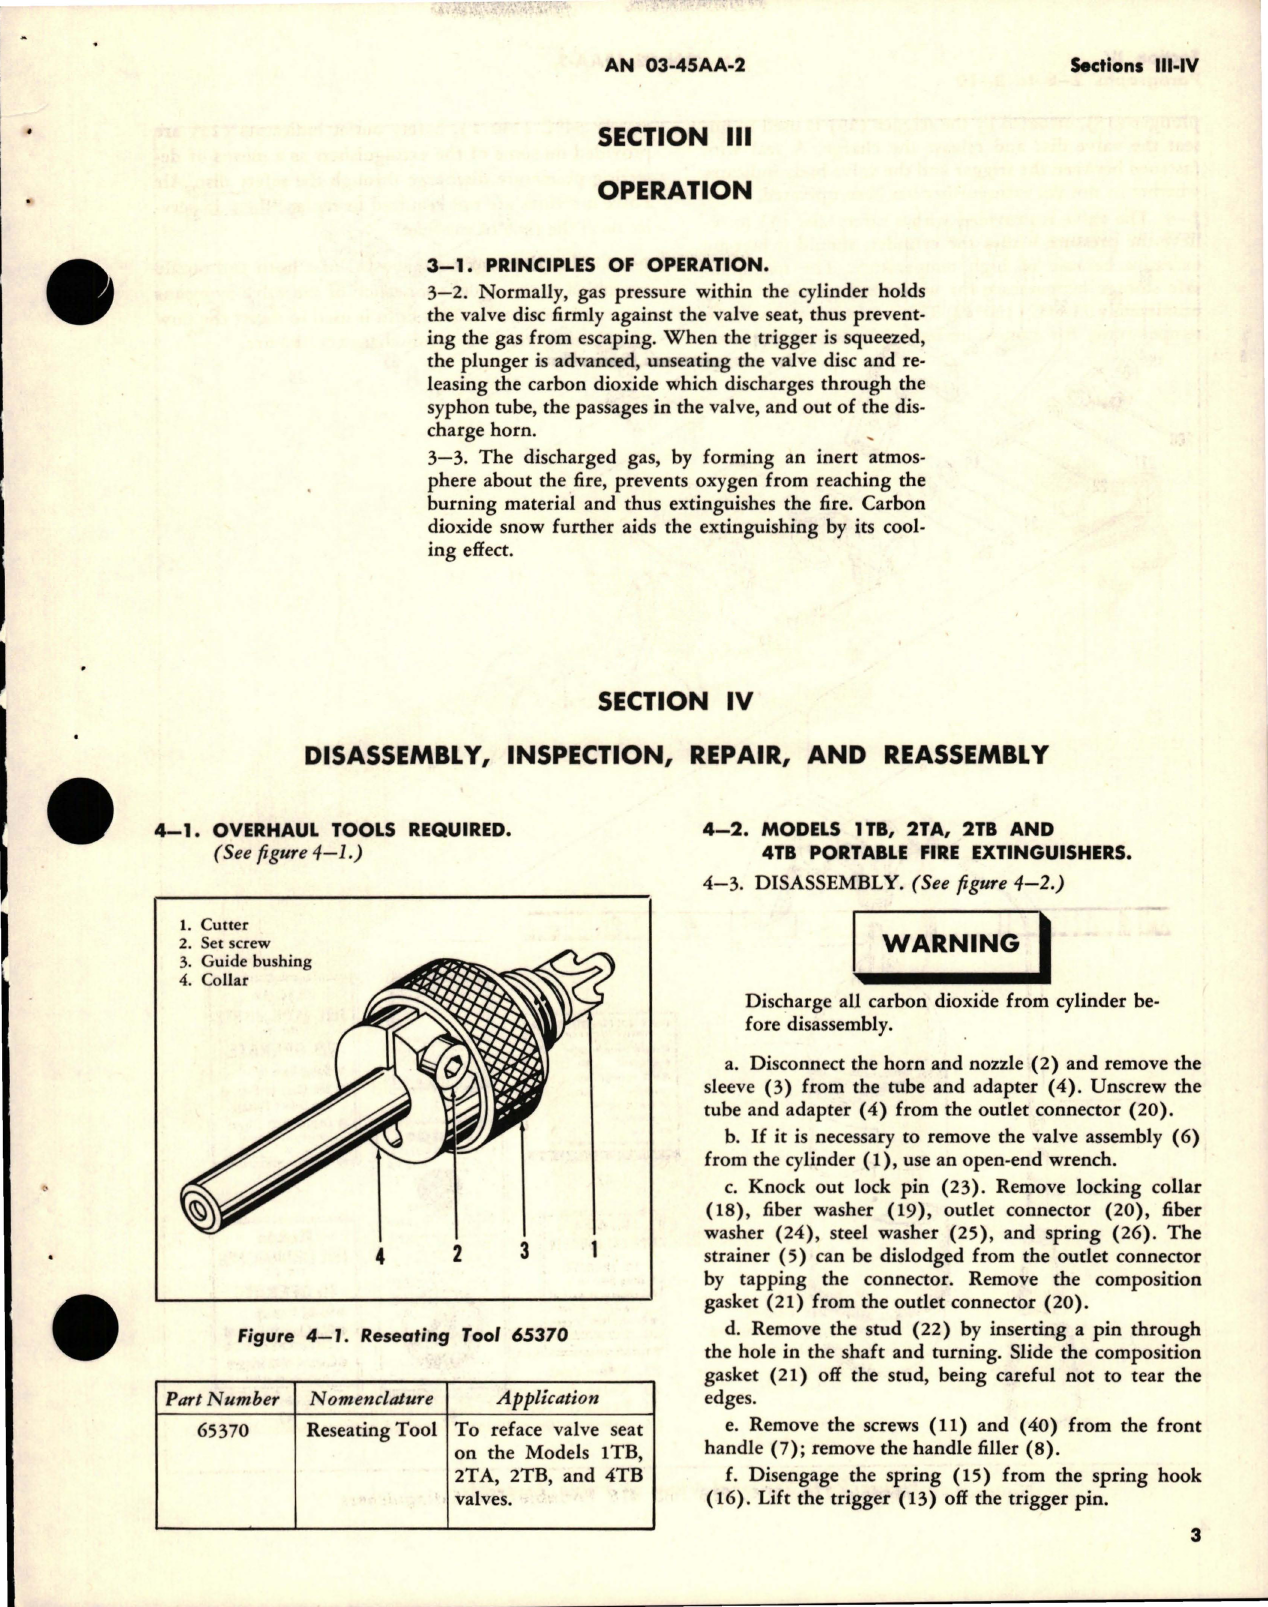 Sample page 7 from AirCorps Library document: Overhaul Instructions for Airborne CO2 Portable Fire Extinguishers - Models 1TB, 2TA, 2TB, 4TB, and 5TA